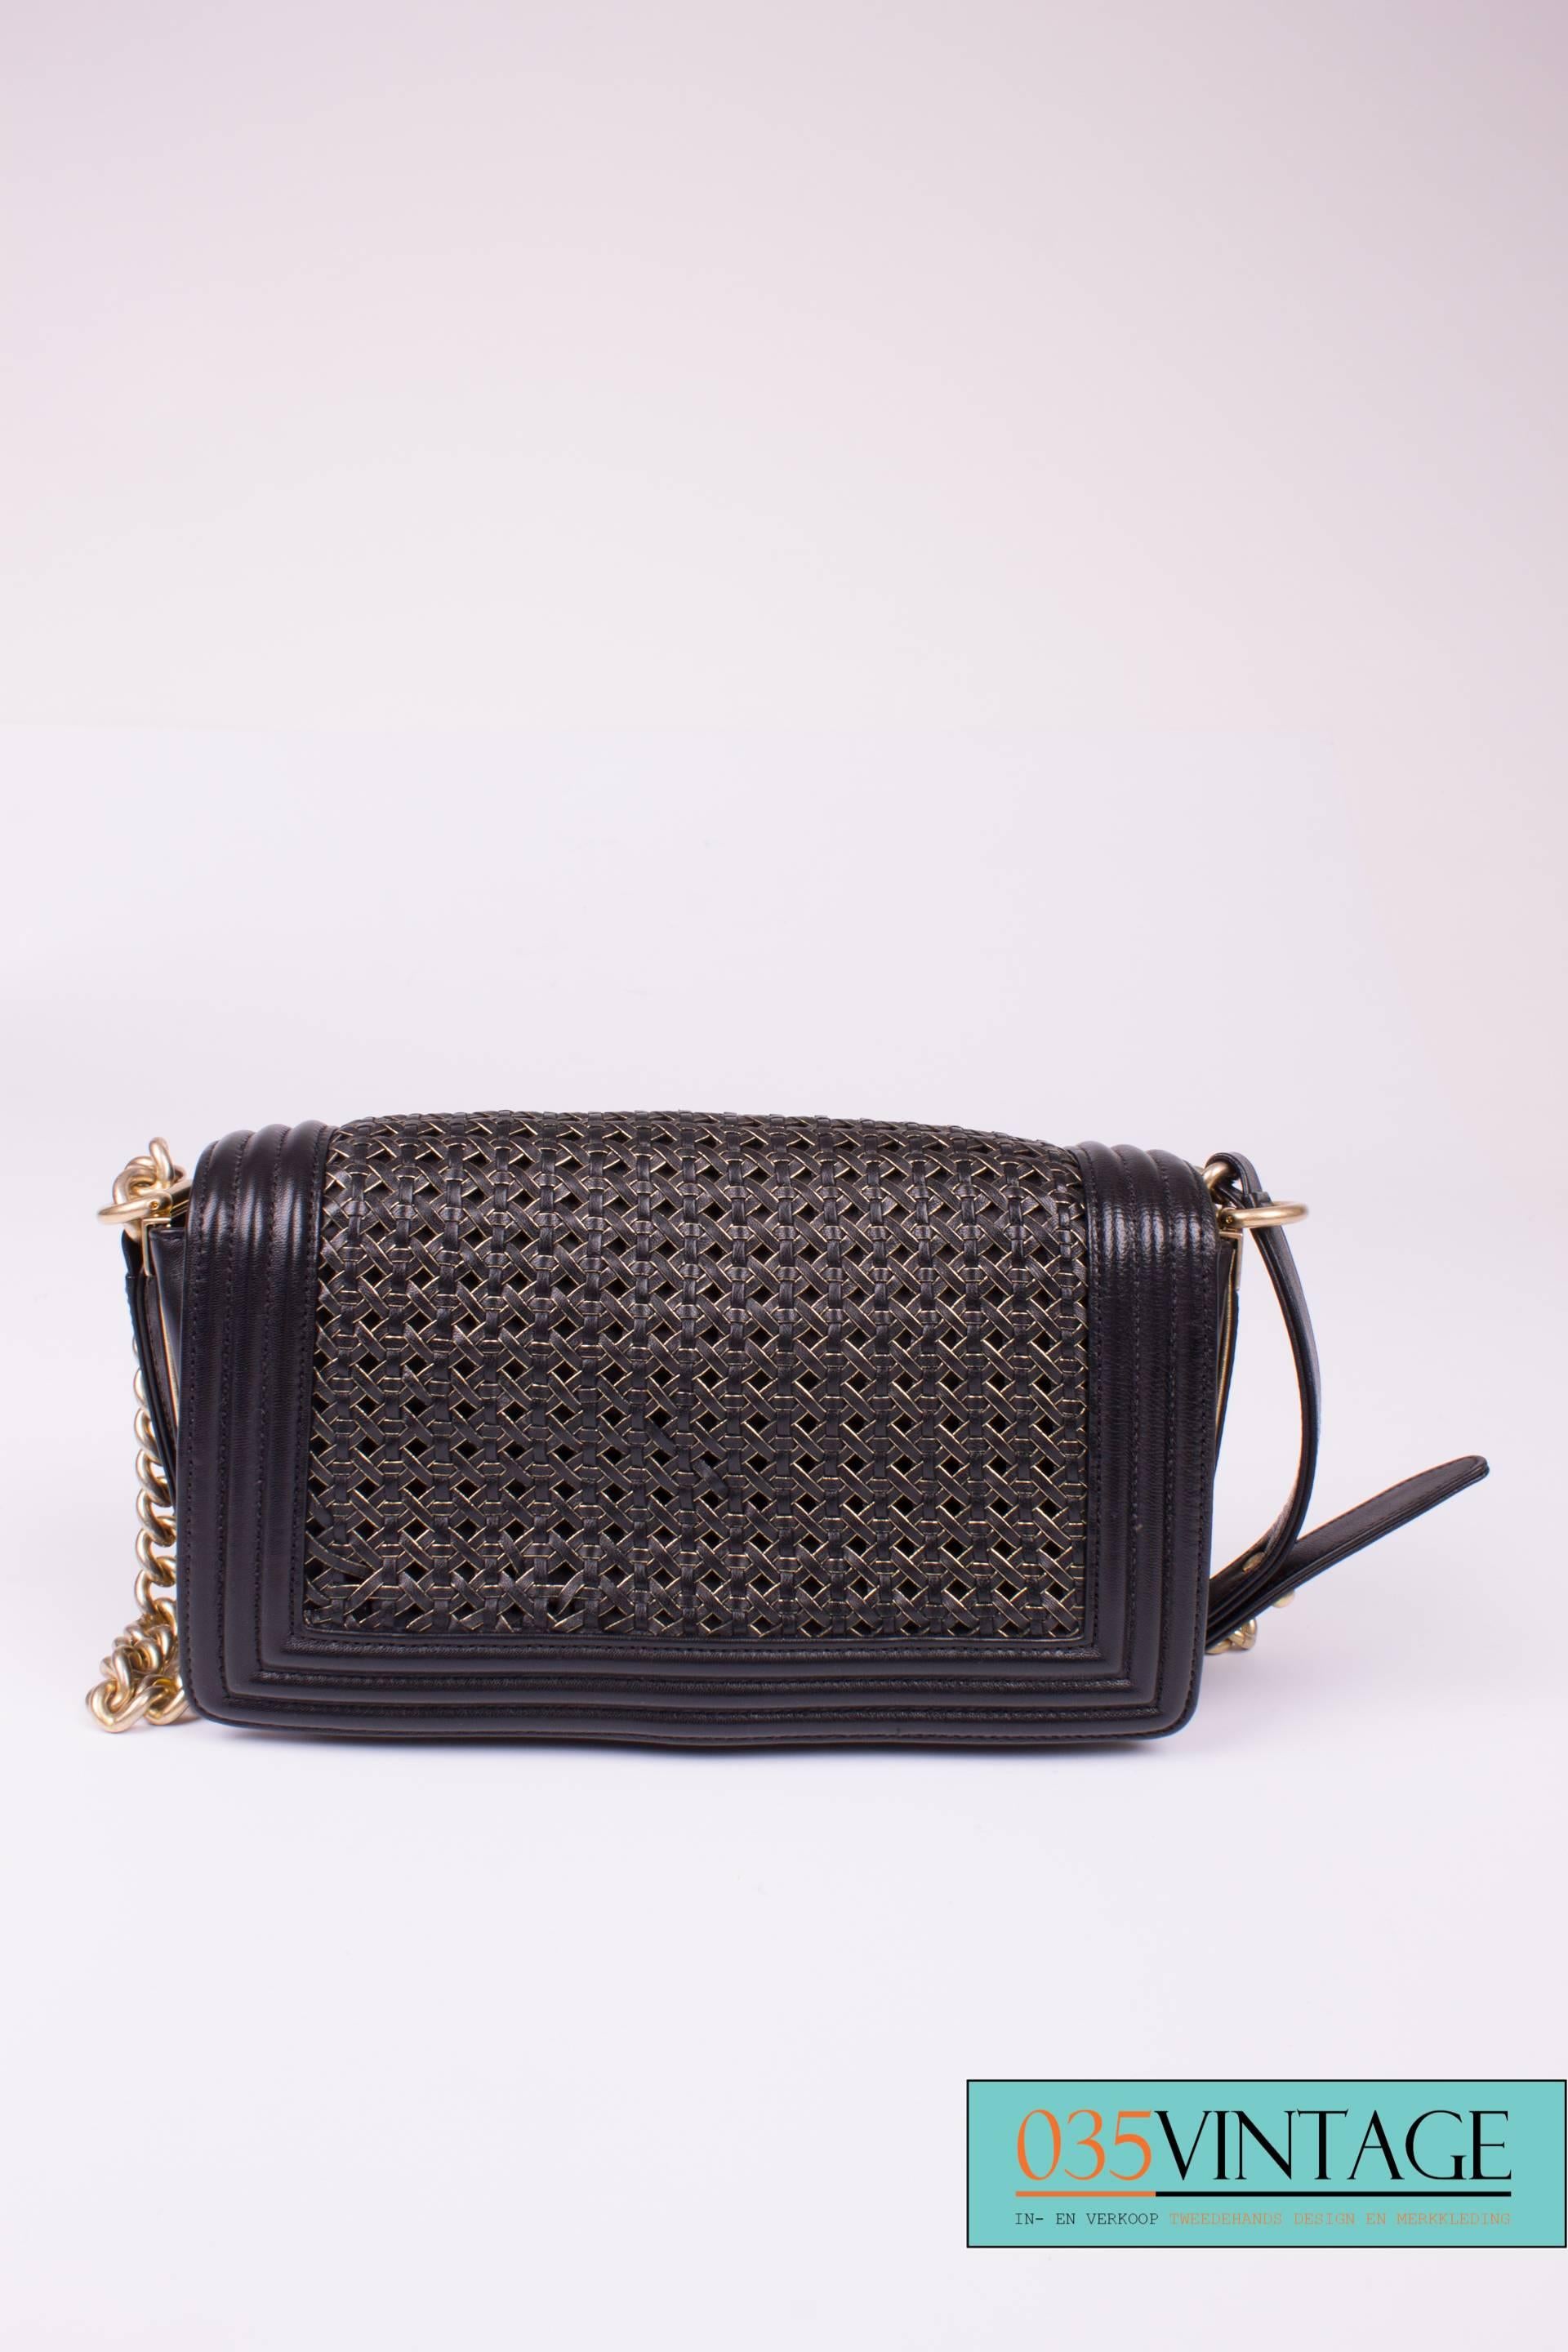 Women's Chanel Le Boy Bag Woven Limited Edition Spring 2014 - black/gold 